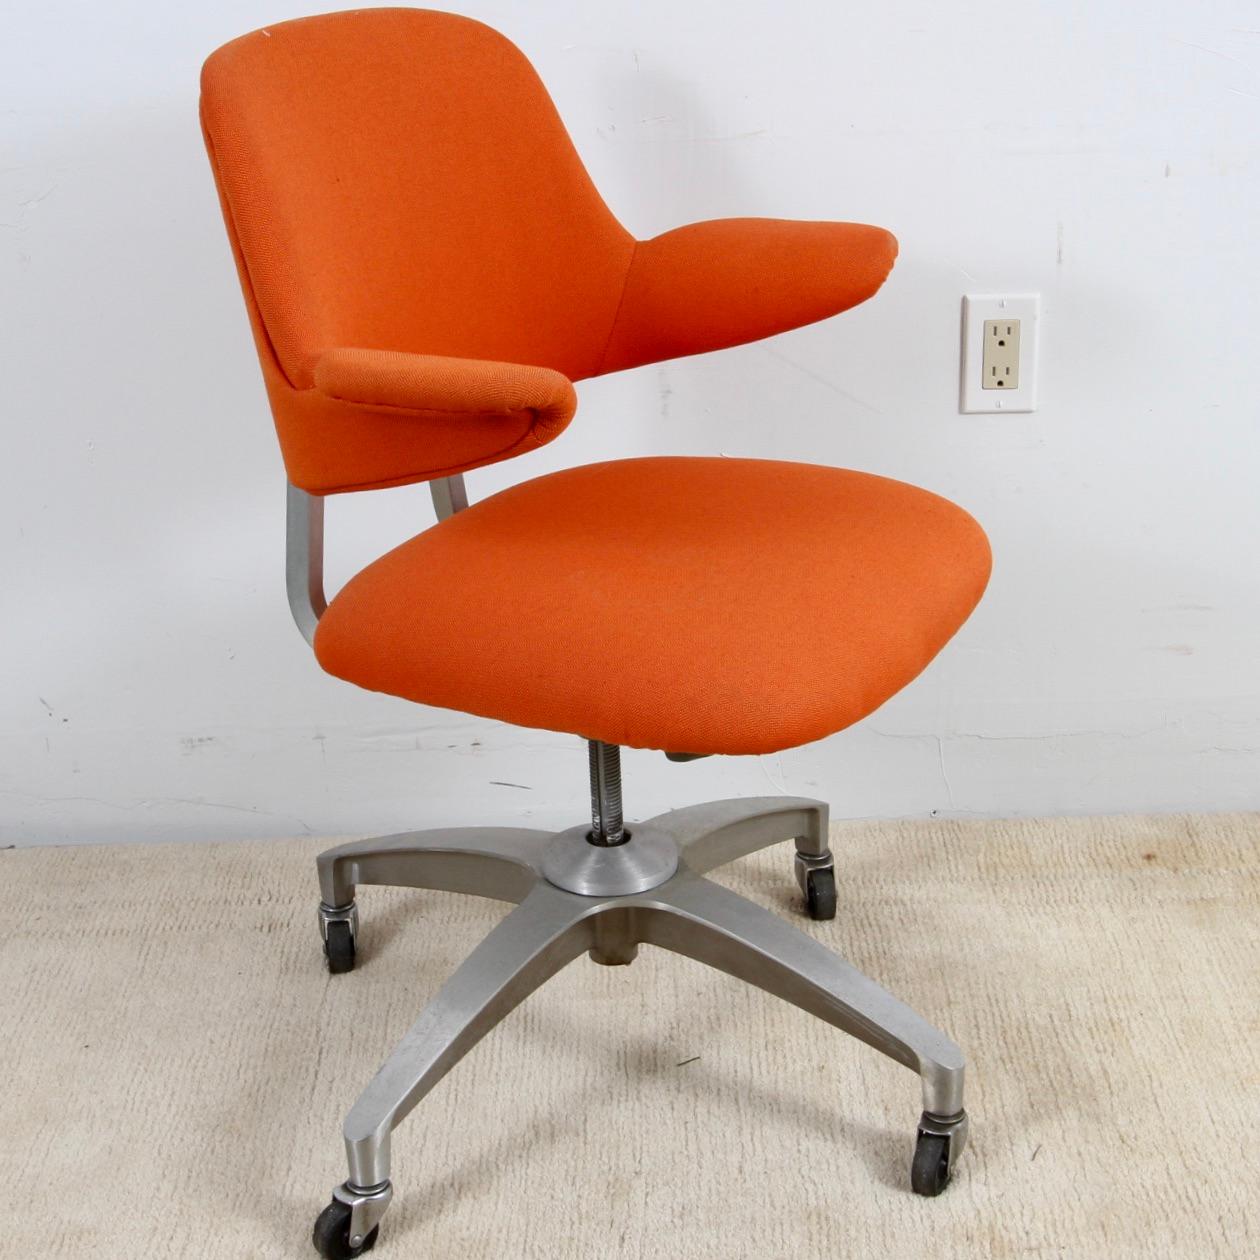 Mid century desk chair with rubber wheels freshly recovered in orange fabric. Well made from brushed steel it, has some weight. Seat height can be adjusted. This Shaw-Walker chair will dress up even the coolest MCM desk.